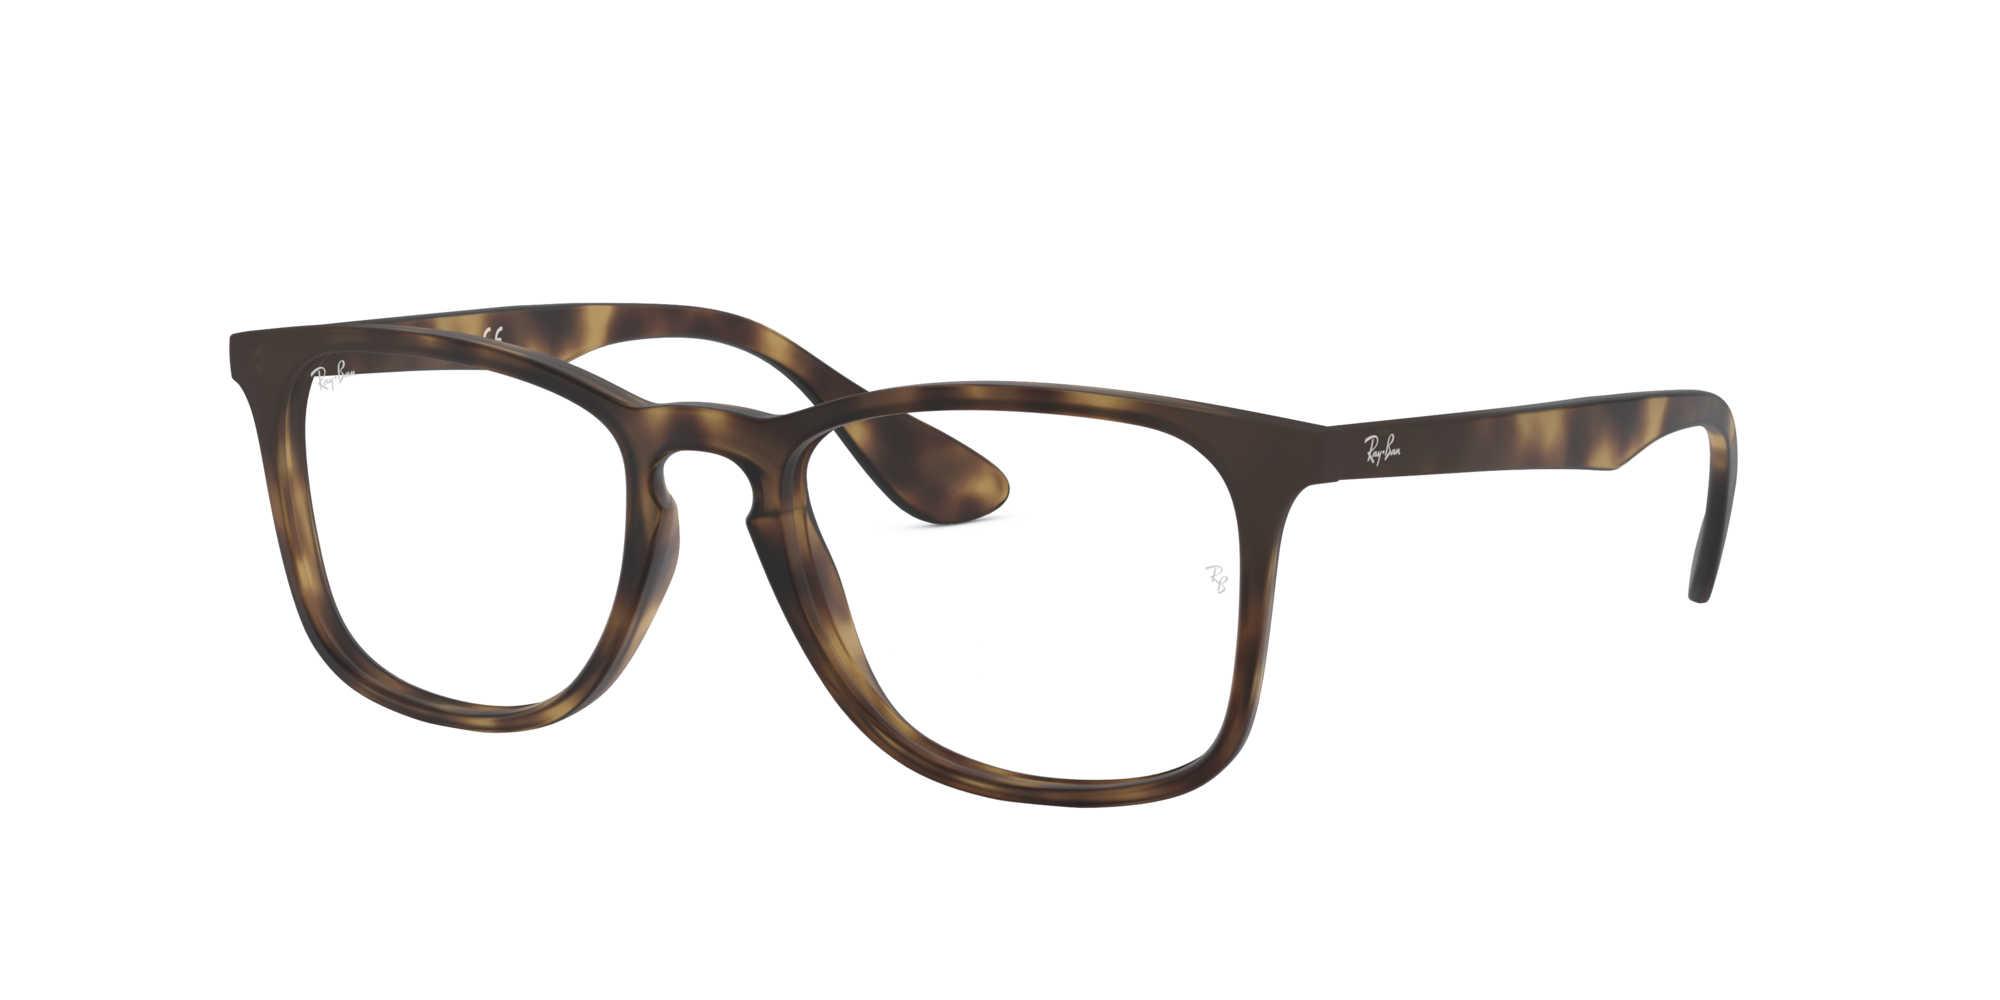 Angle_Left01 Ray-Ban RX 7074 Glasses Transparent / Tortoise Shell